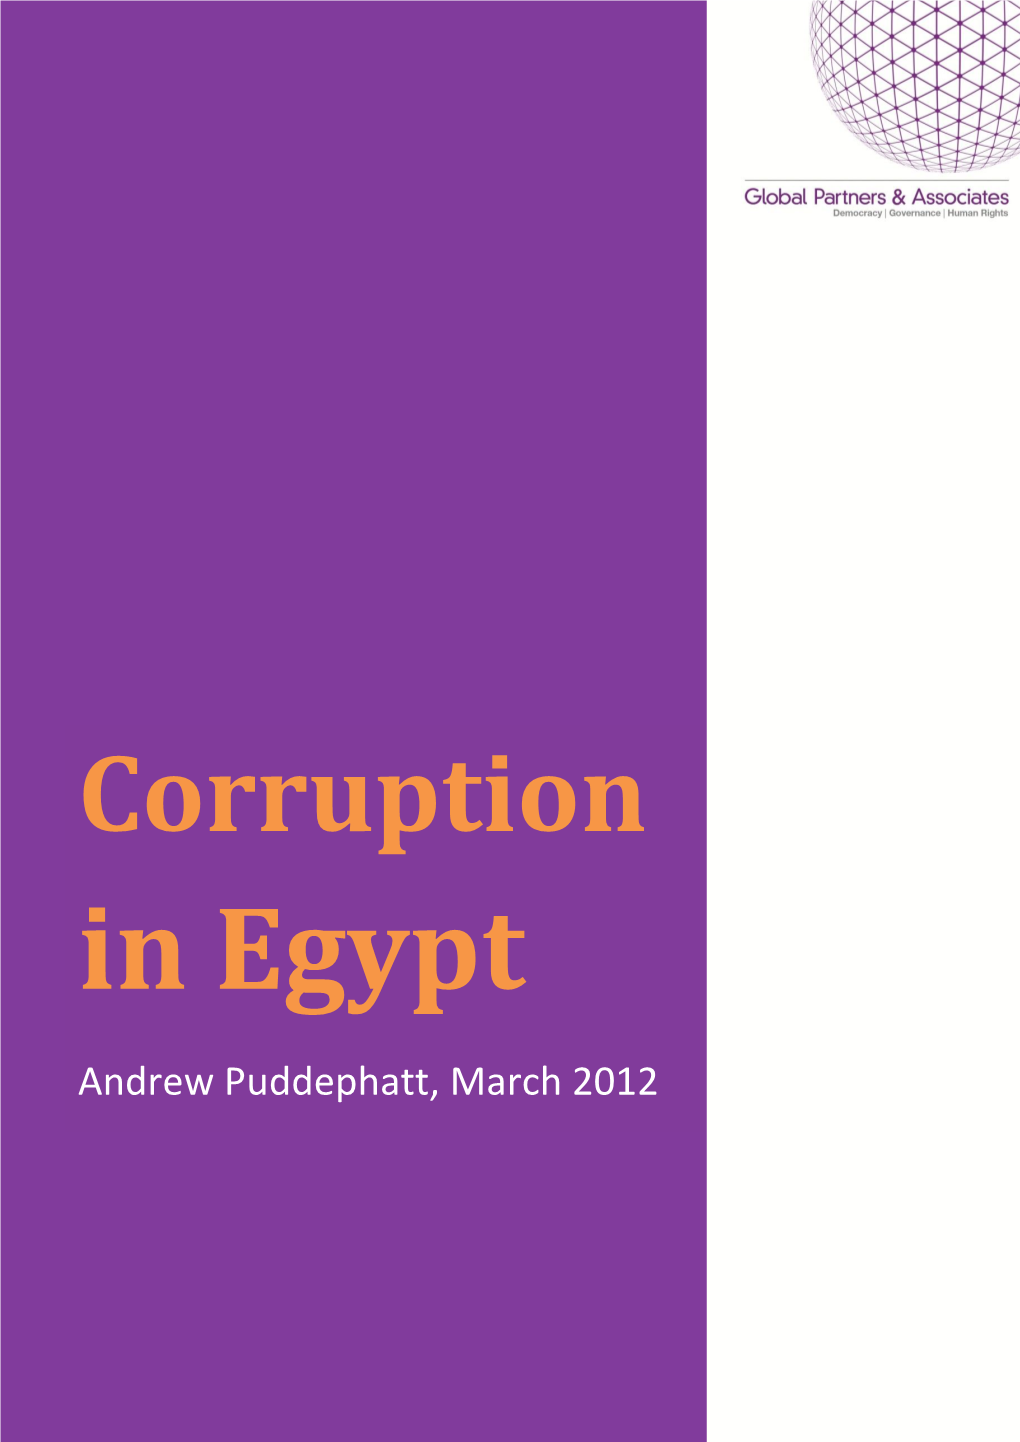 Corruption in Egypt